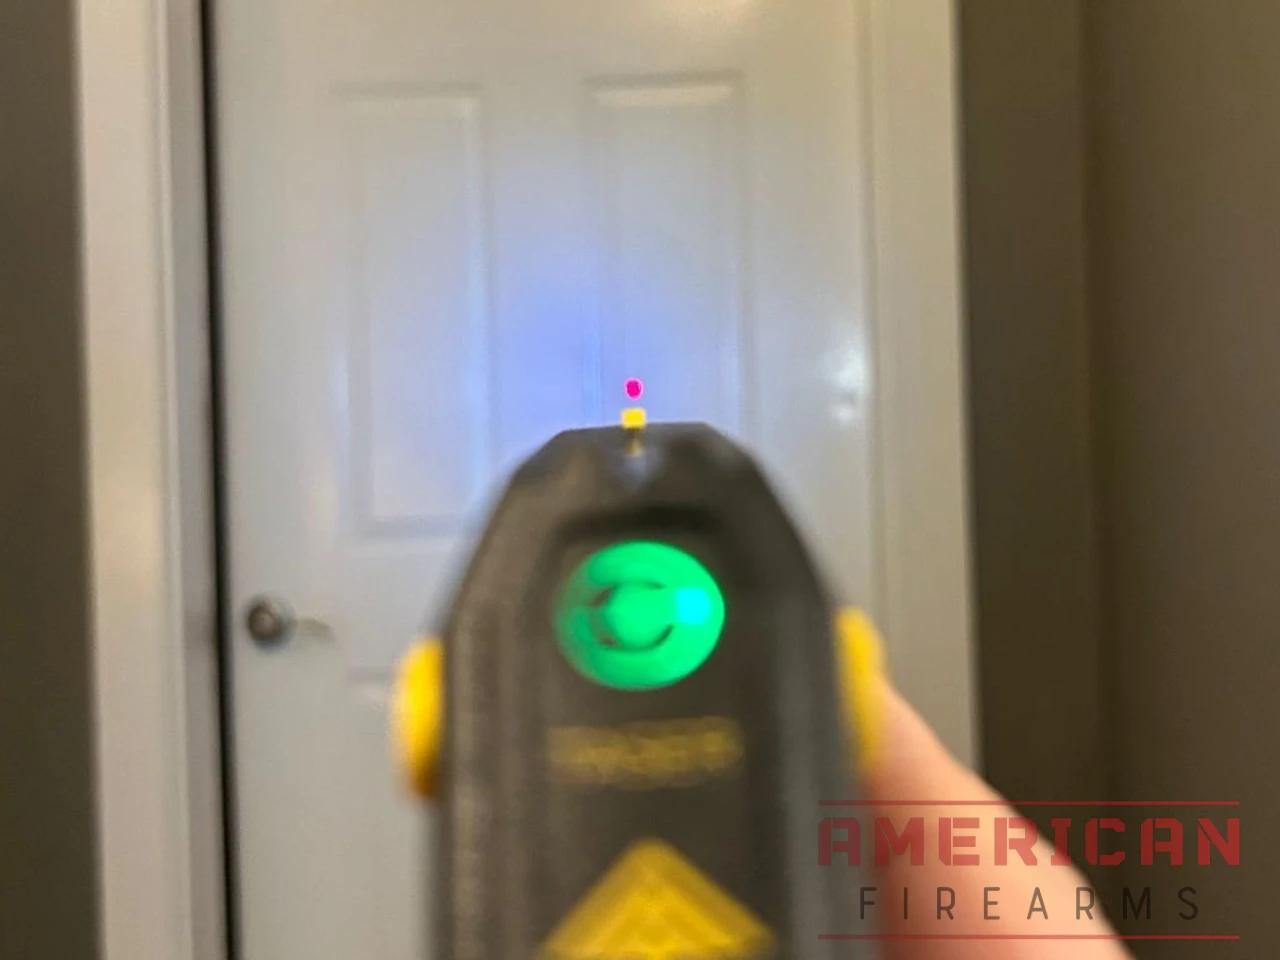 The laser is well aligned to the sights, especially at 10-15 feet.